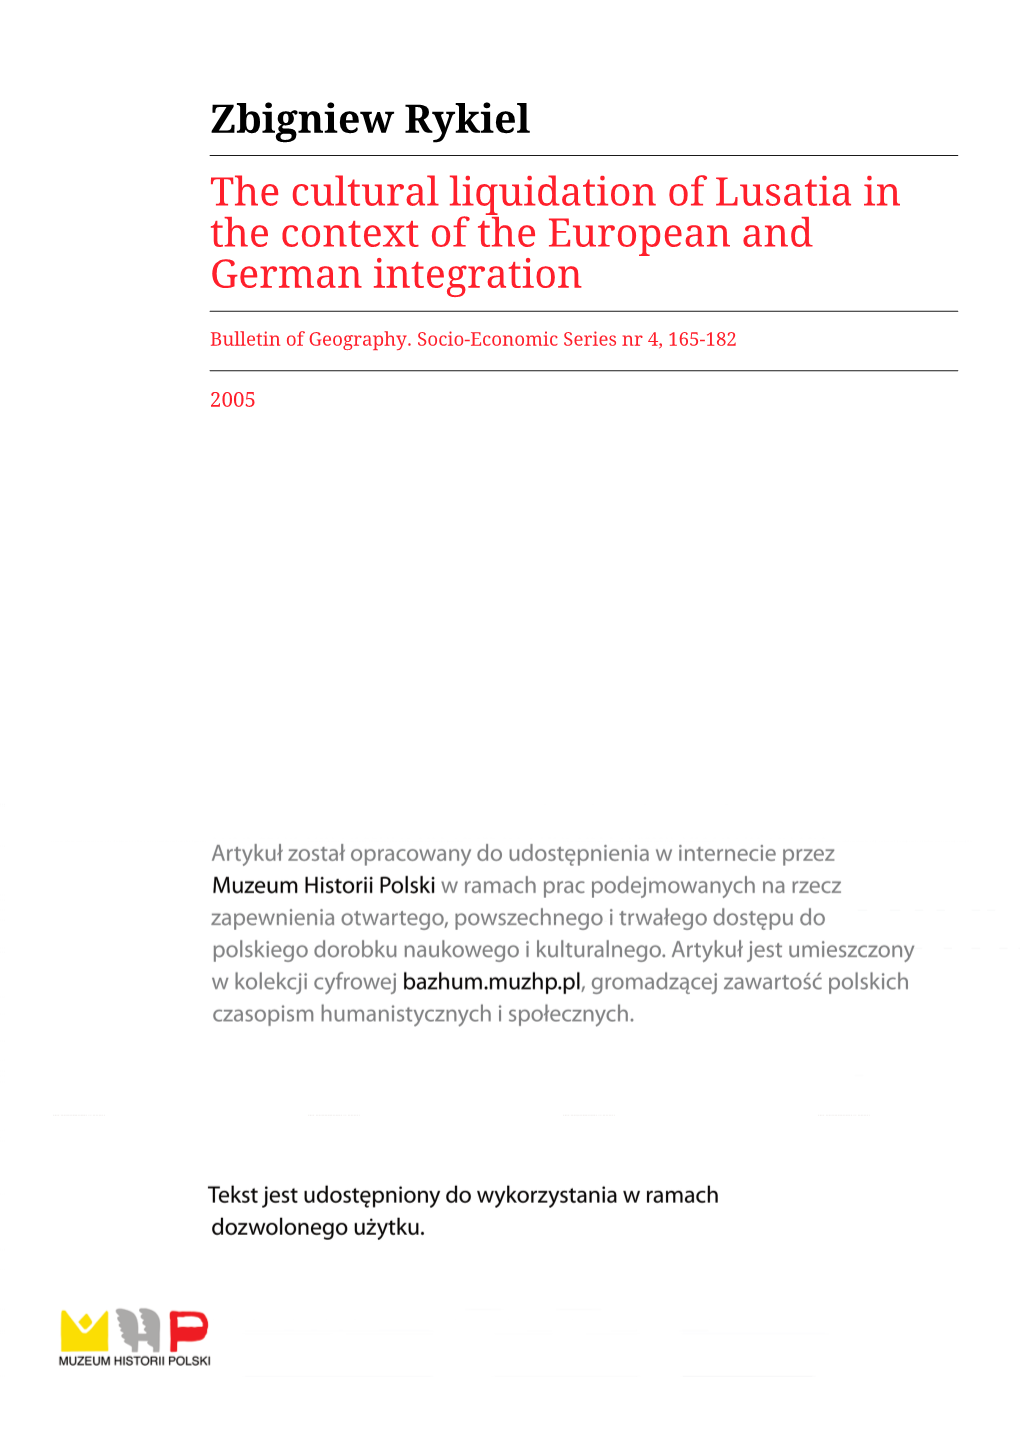 Zbigniew Rykiel the Cultural Liquidation of Lusatia in the Context of the European and German Integration